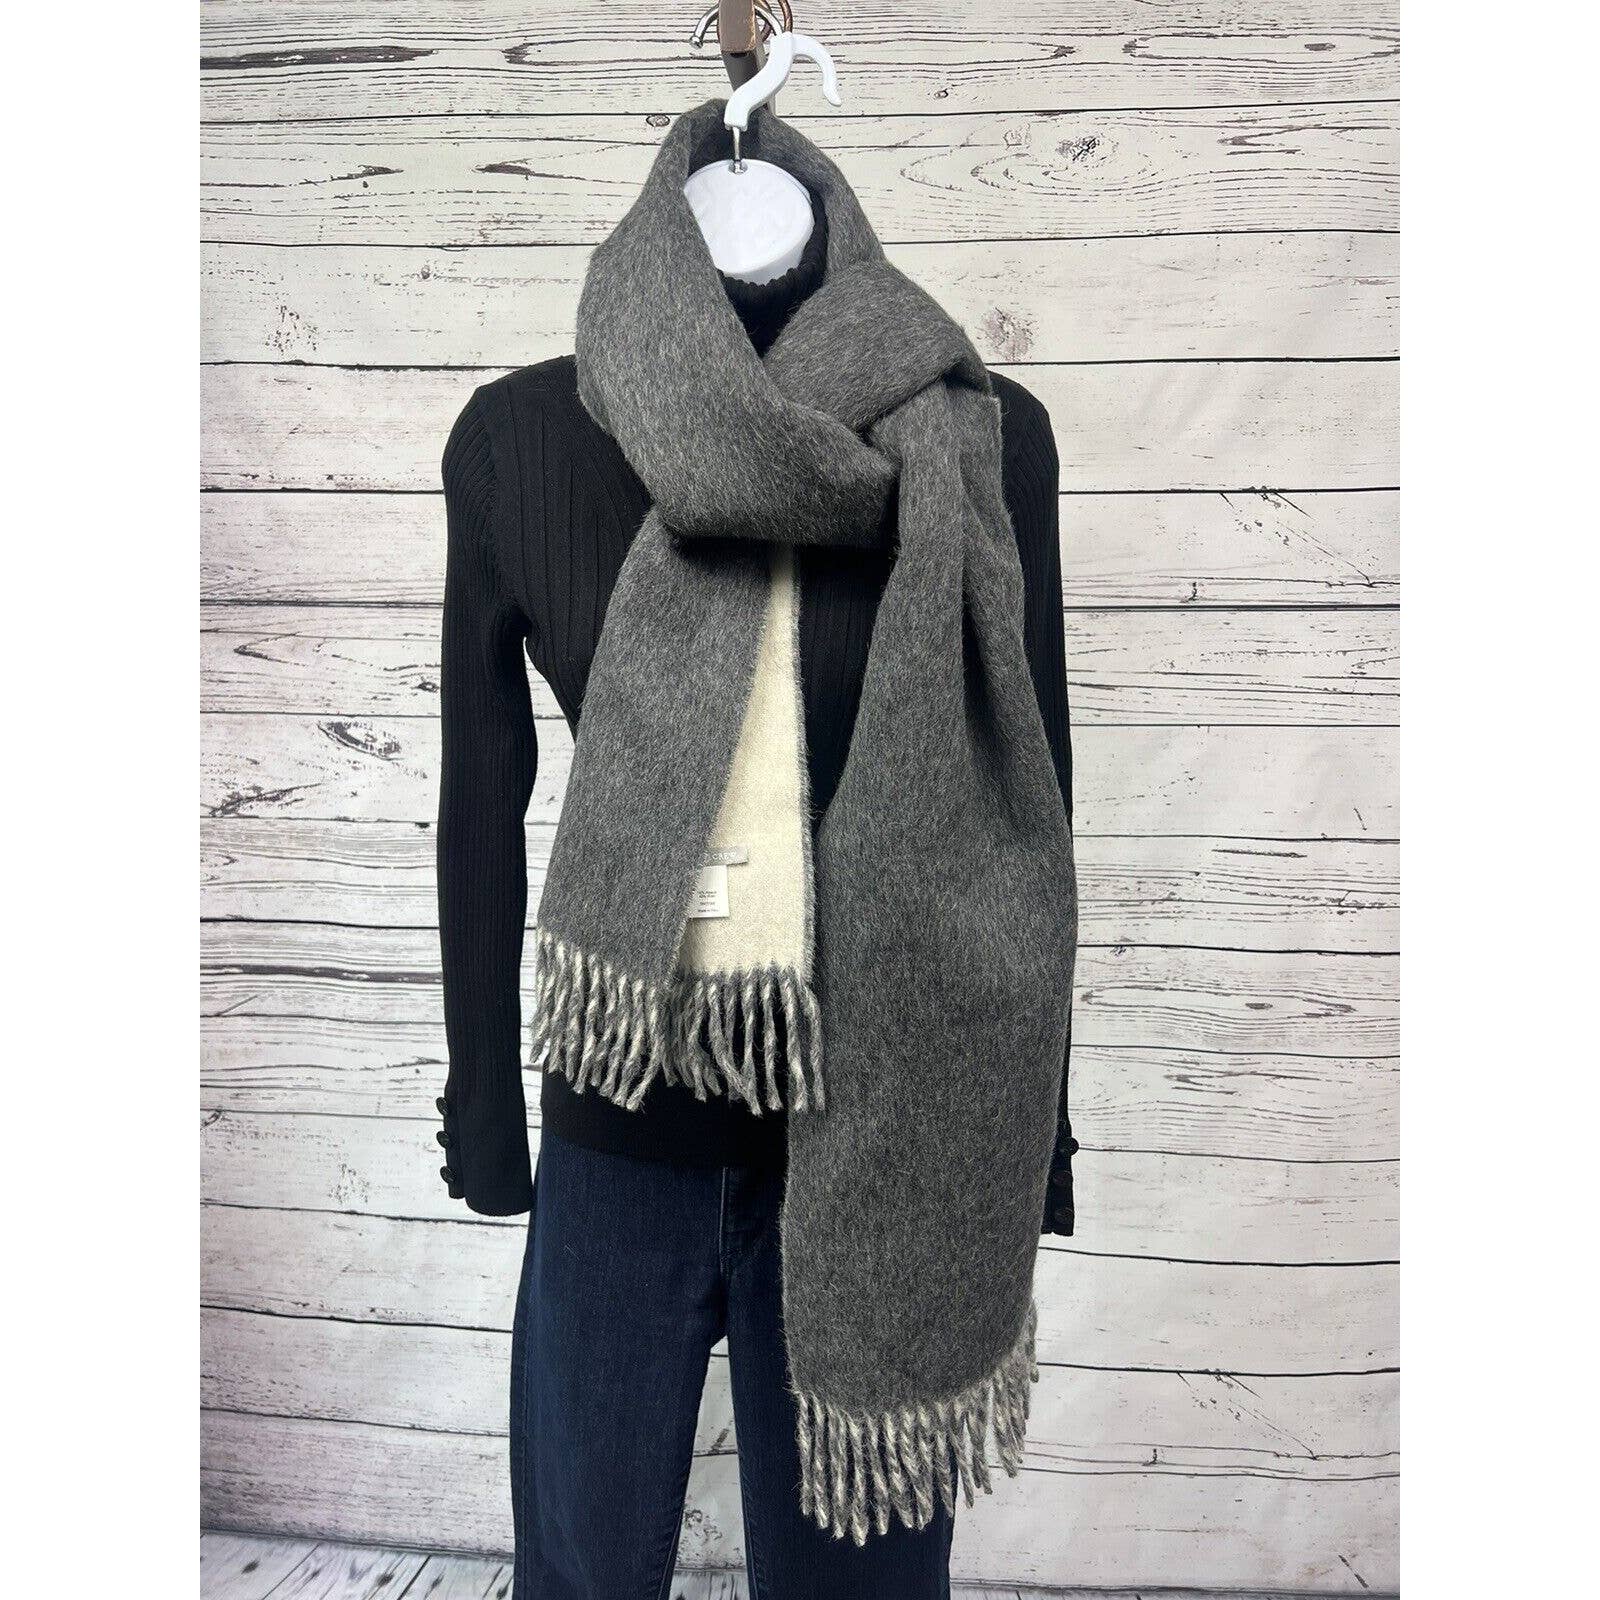 J Crew Fringed Scarf Alpaca And Wool Gray And Cream Multifunctional 73” X 13”